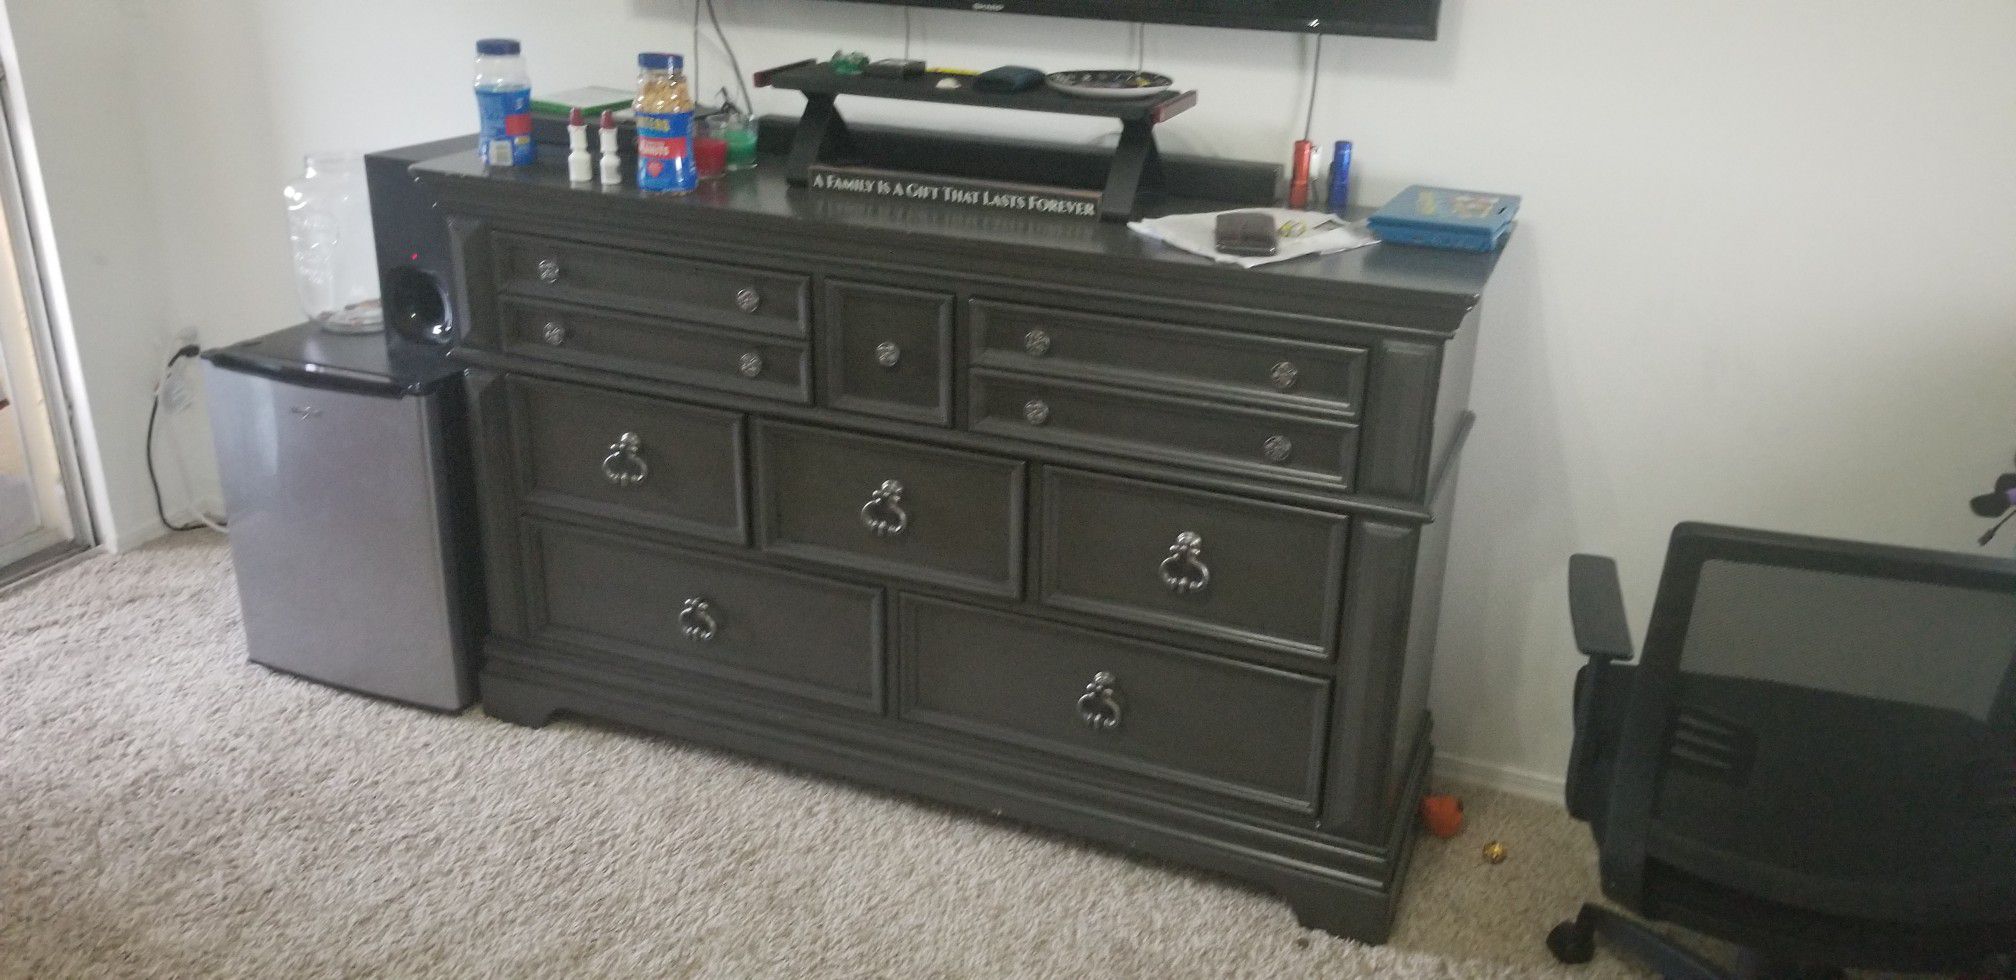 Queen Bed frame and dresser from City Furniture in good condition. Mattress and box spring not included